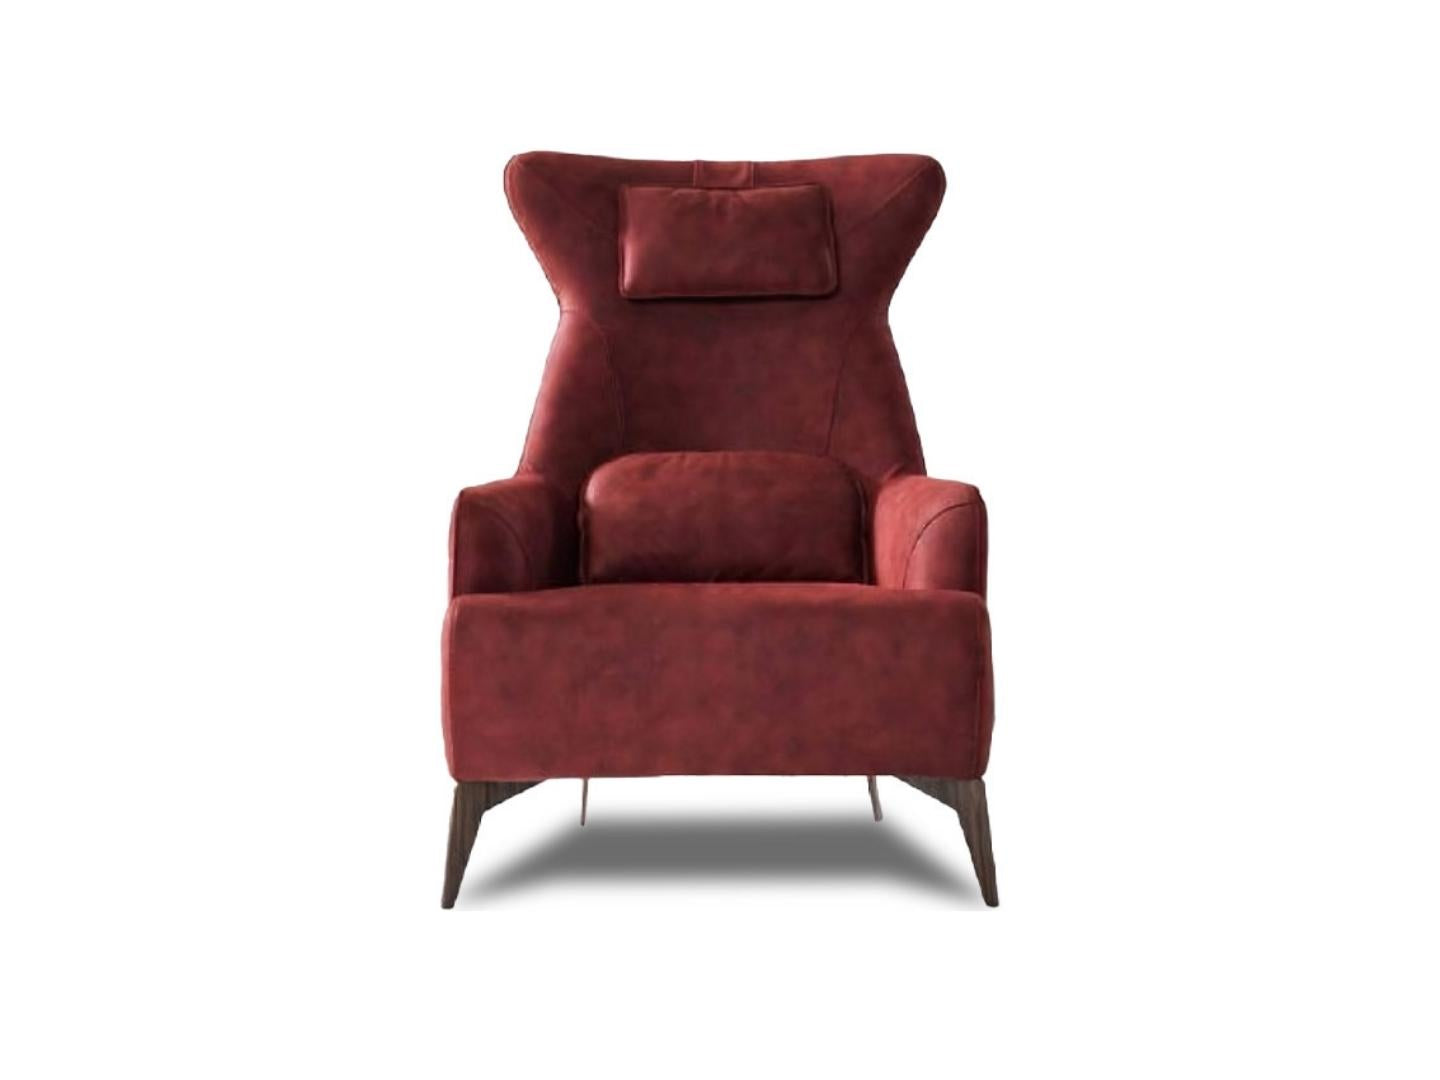 Egon armchair - Lux Furniture / red